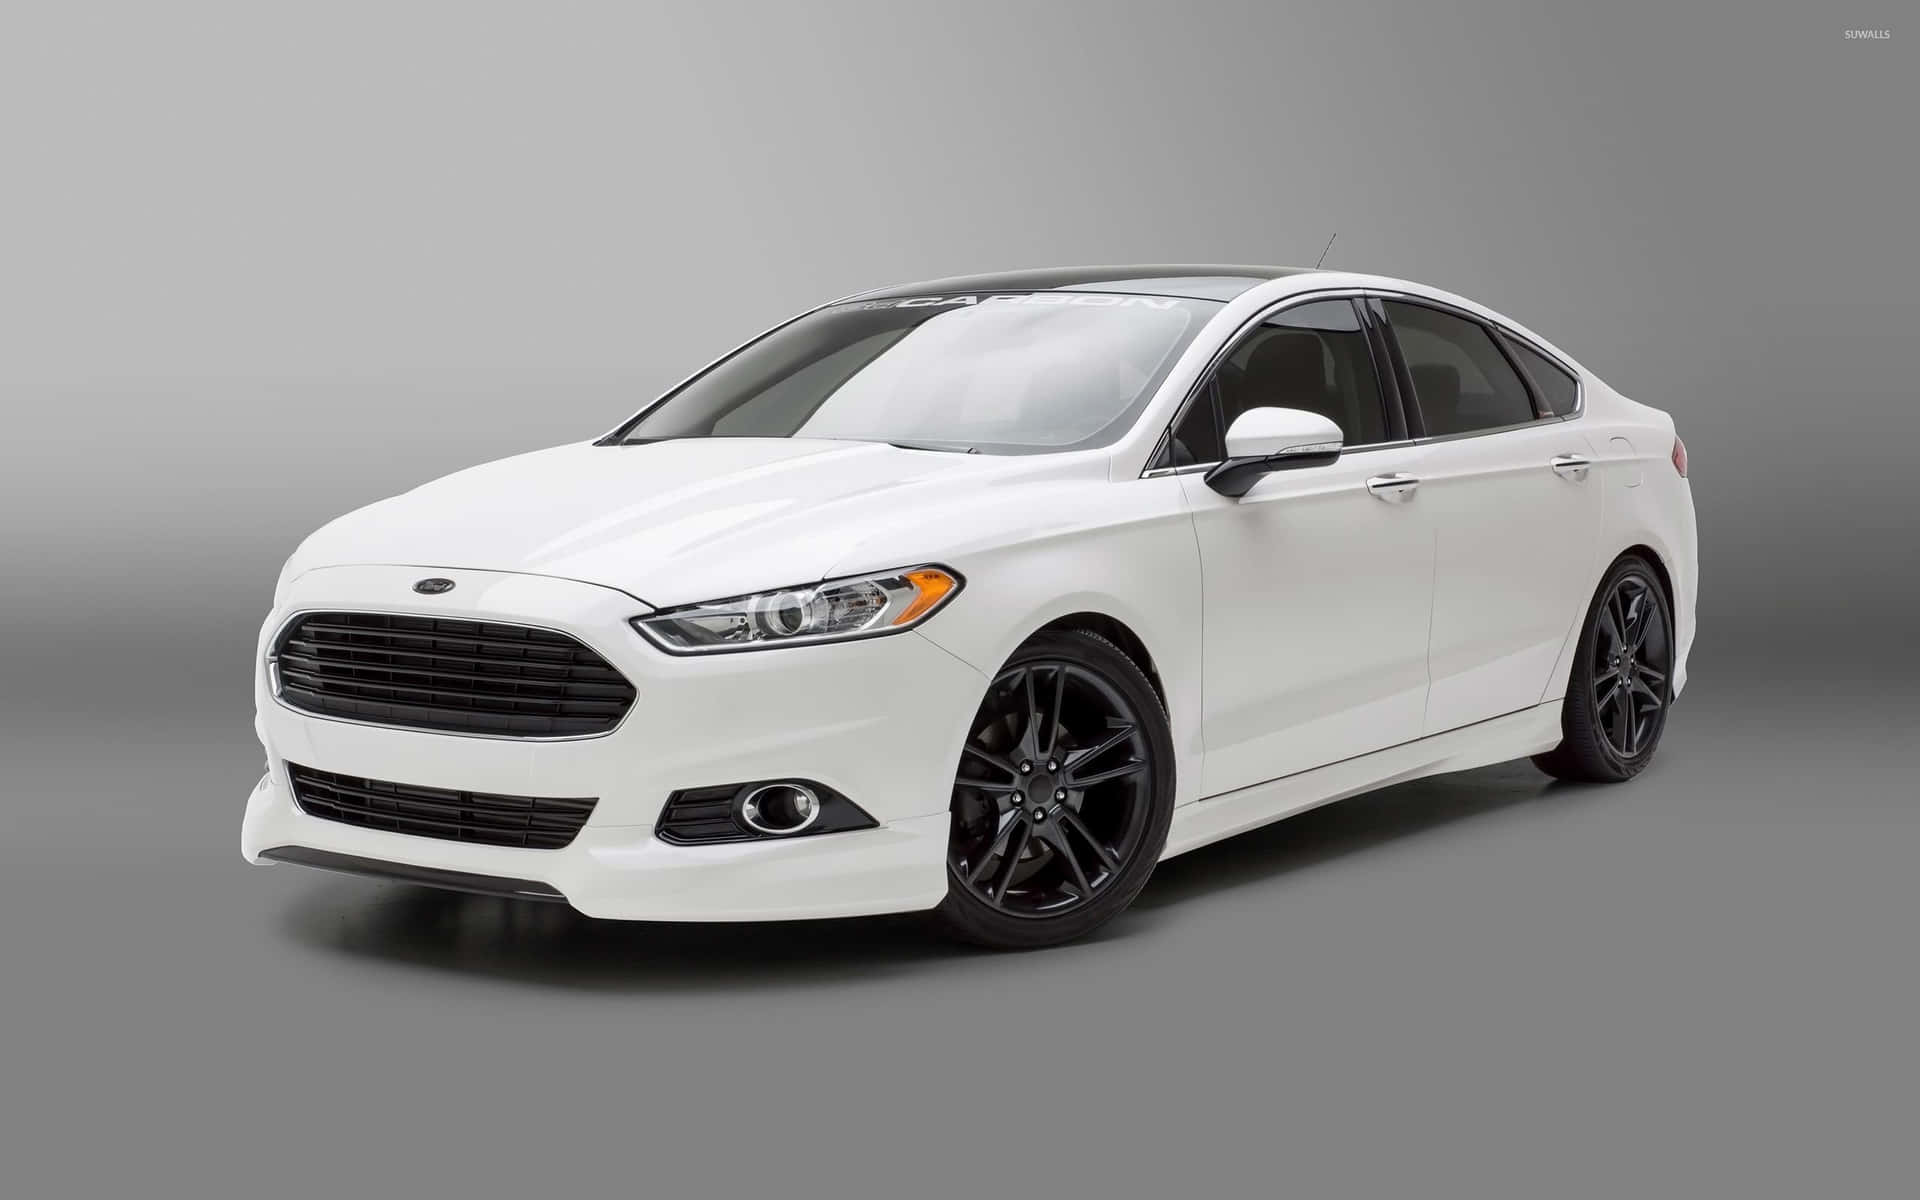 Captivating Ford Fusion: Sleek and Sporty Design Wallpaper